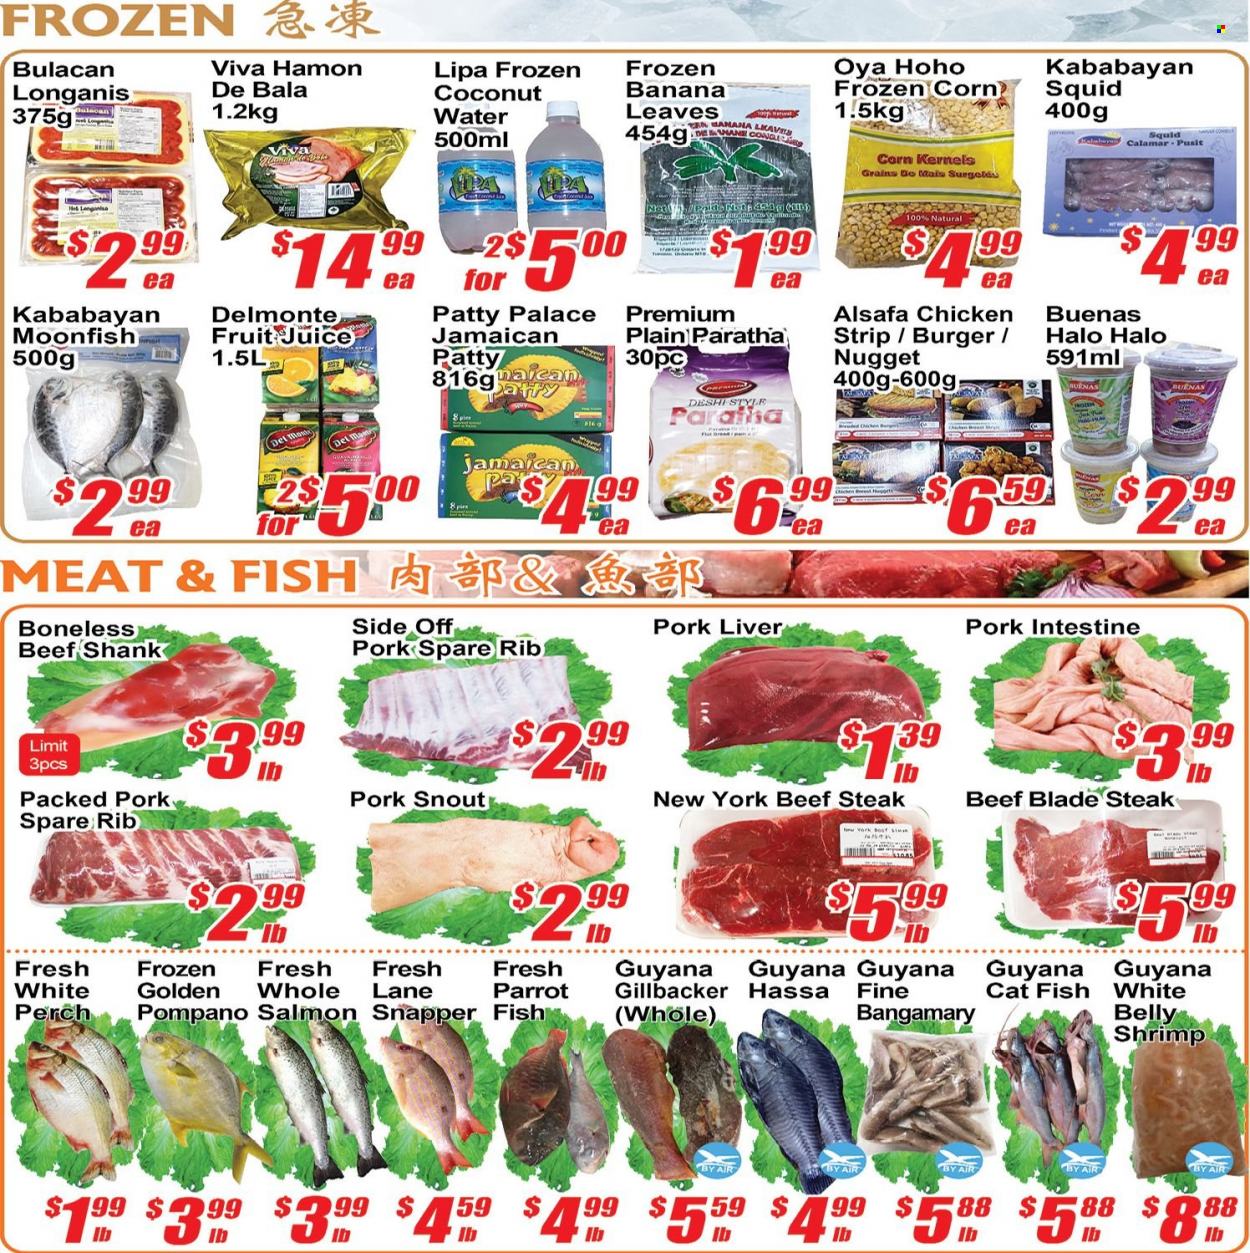 thumbnail - Jian Hing Supermarket Flyer - May 20, 2022 - May 26, 2022 - Sales products - corn, salmon, squid, perch, pompano, fish, shrimps, hamburger, juice, fruit juice, coconut water, beef meat, beef shank, beef steak, pork liver, pork meat, steak. Page 2.